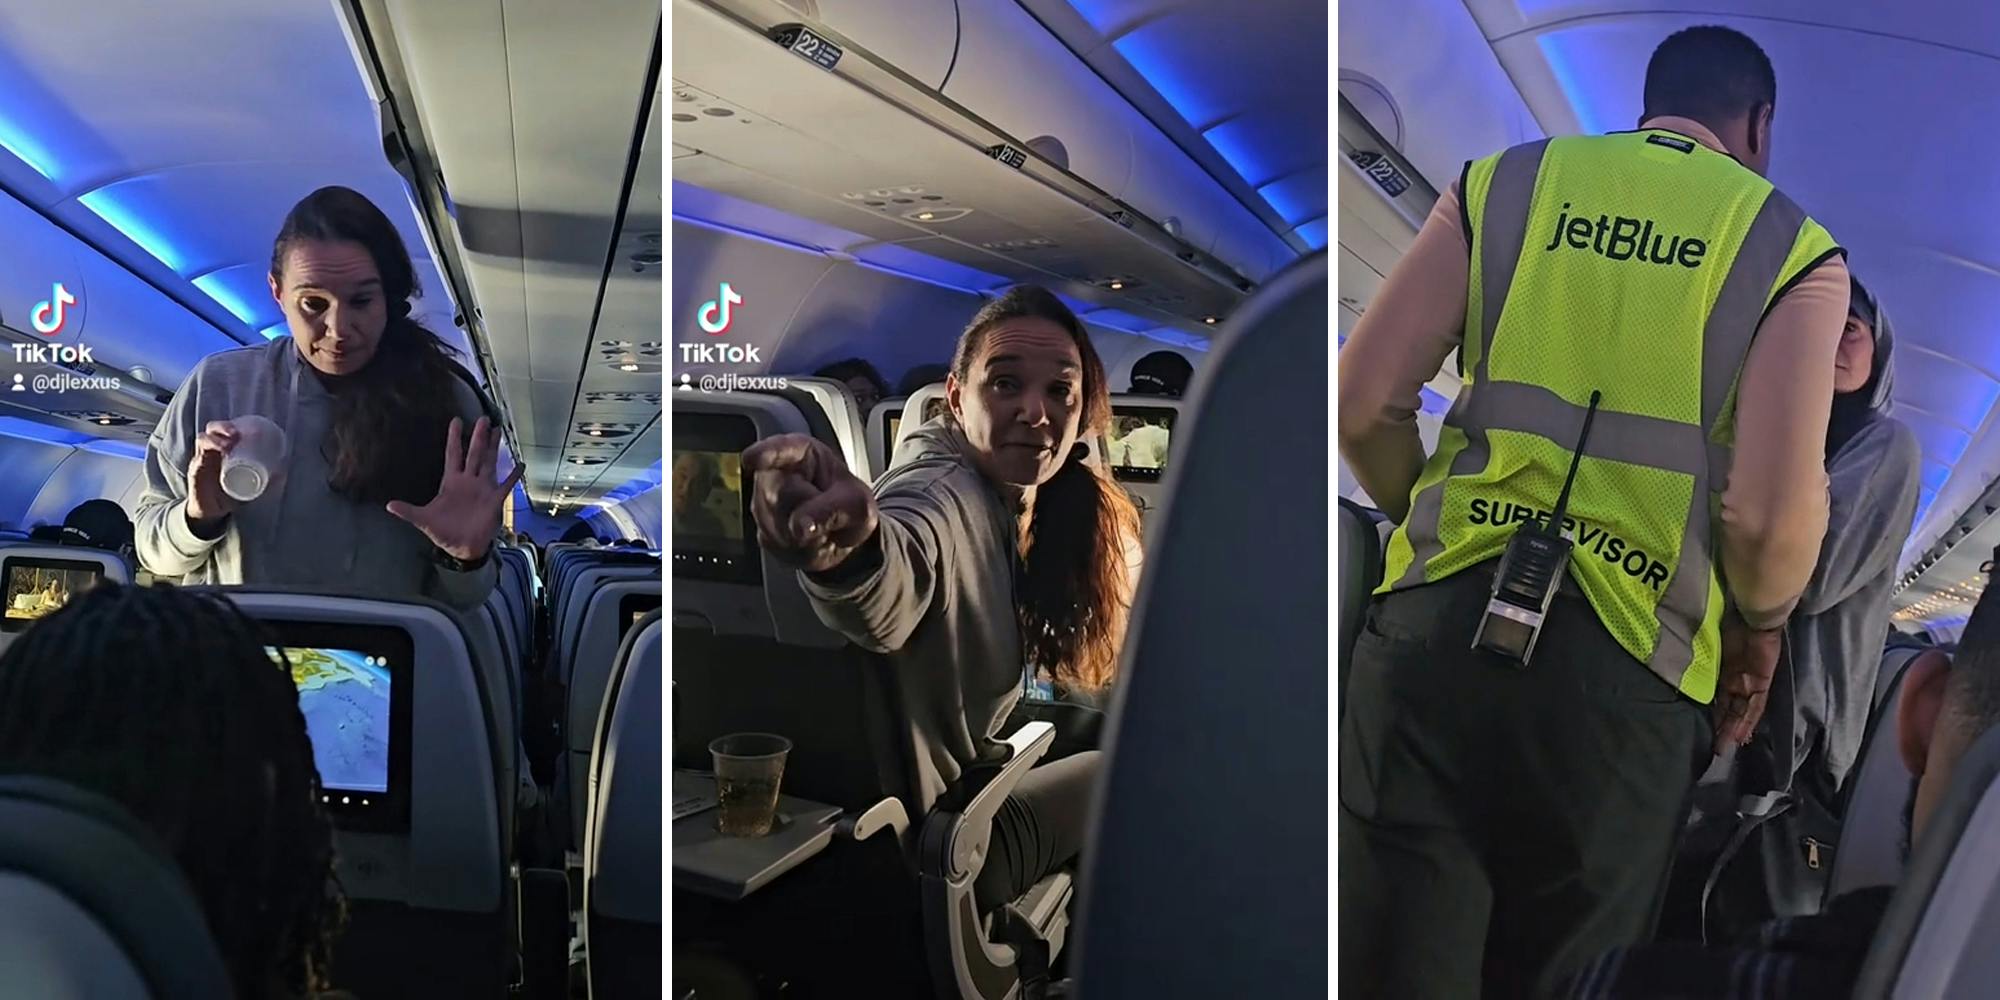 woman with empty cup and hands up (l) woman pointing on airplane (c) jetblue supervisor escorting woman from plane (r)